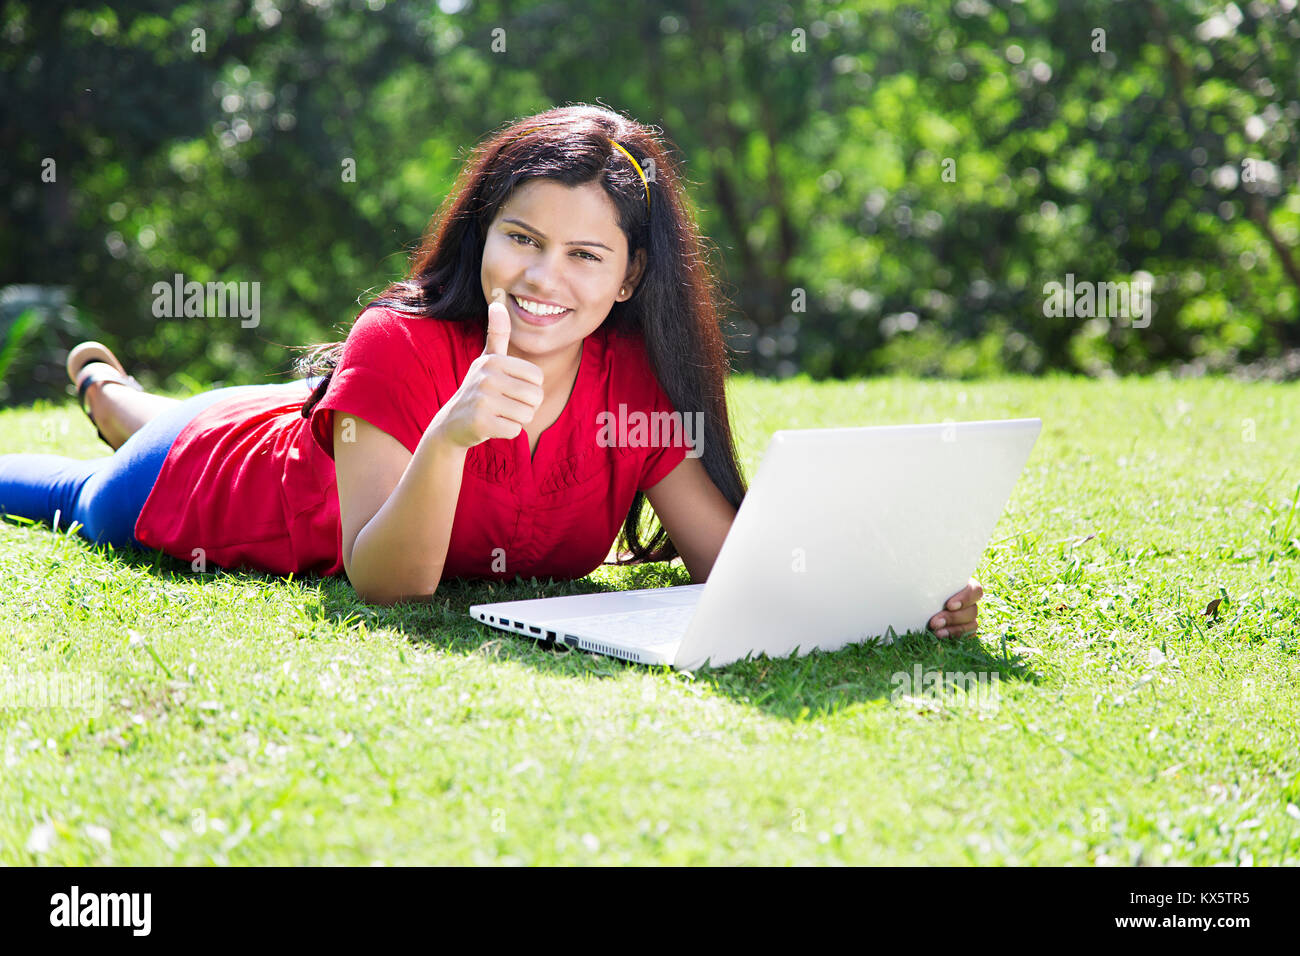 3 Indian College Students Laptop Studying Education Learning Thumbsup Park Stock Photo